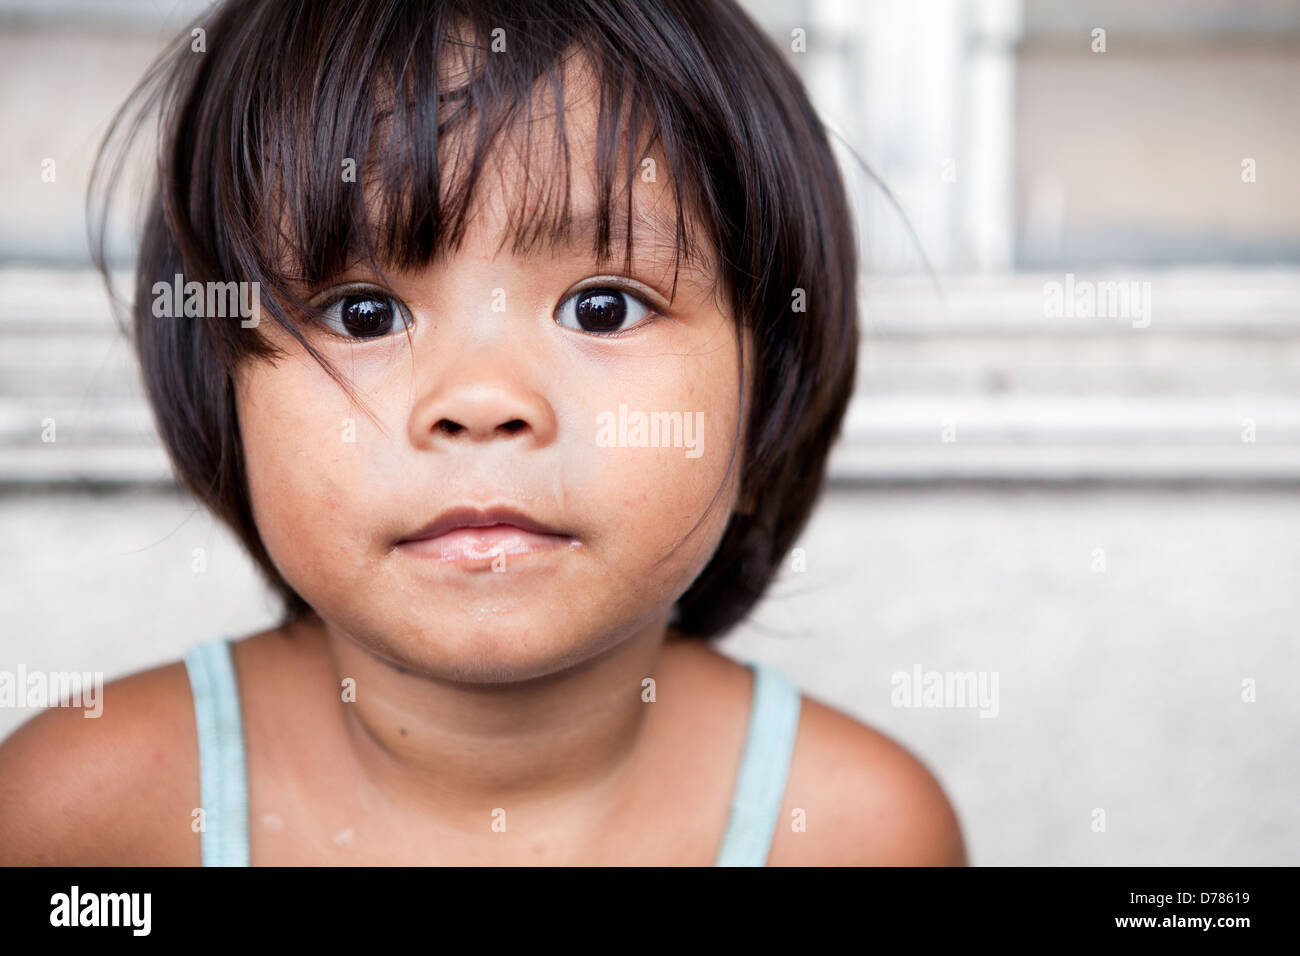 Young girl portrait in the Philippines. Filipina child living in poverty. Stock Photo